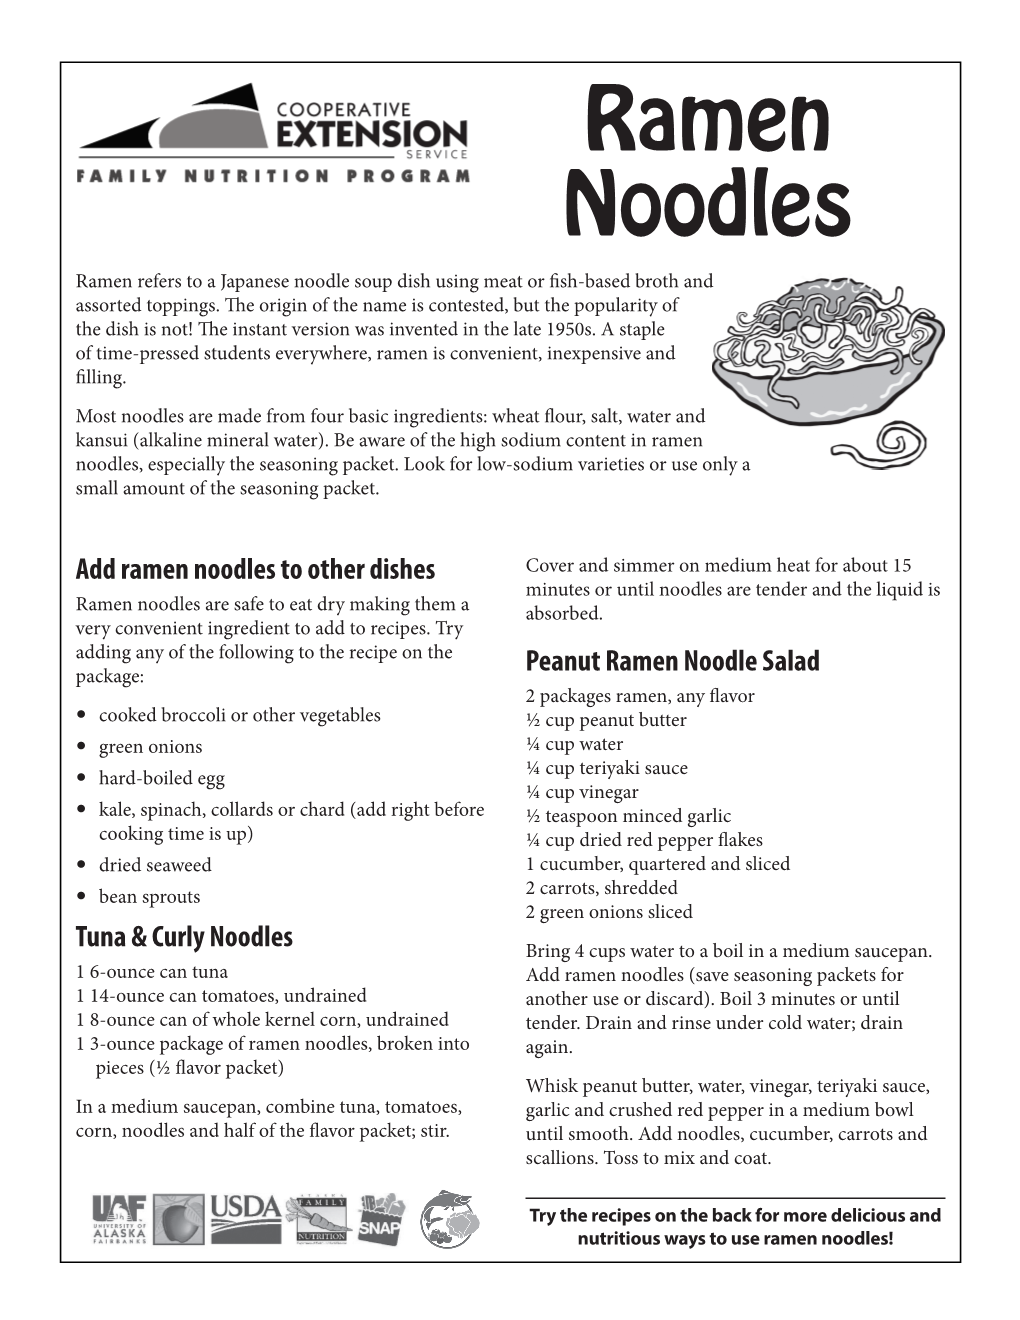 Ramen Noodles Ramen Refers to a Japanese Noodle Soup Dish Using Meat Or Fish-Based Broth and Assorted Toppings